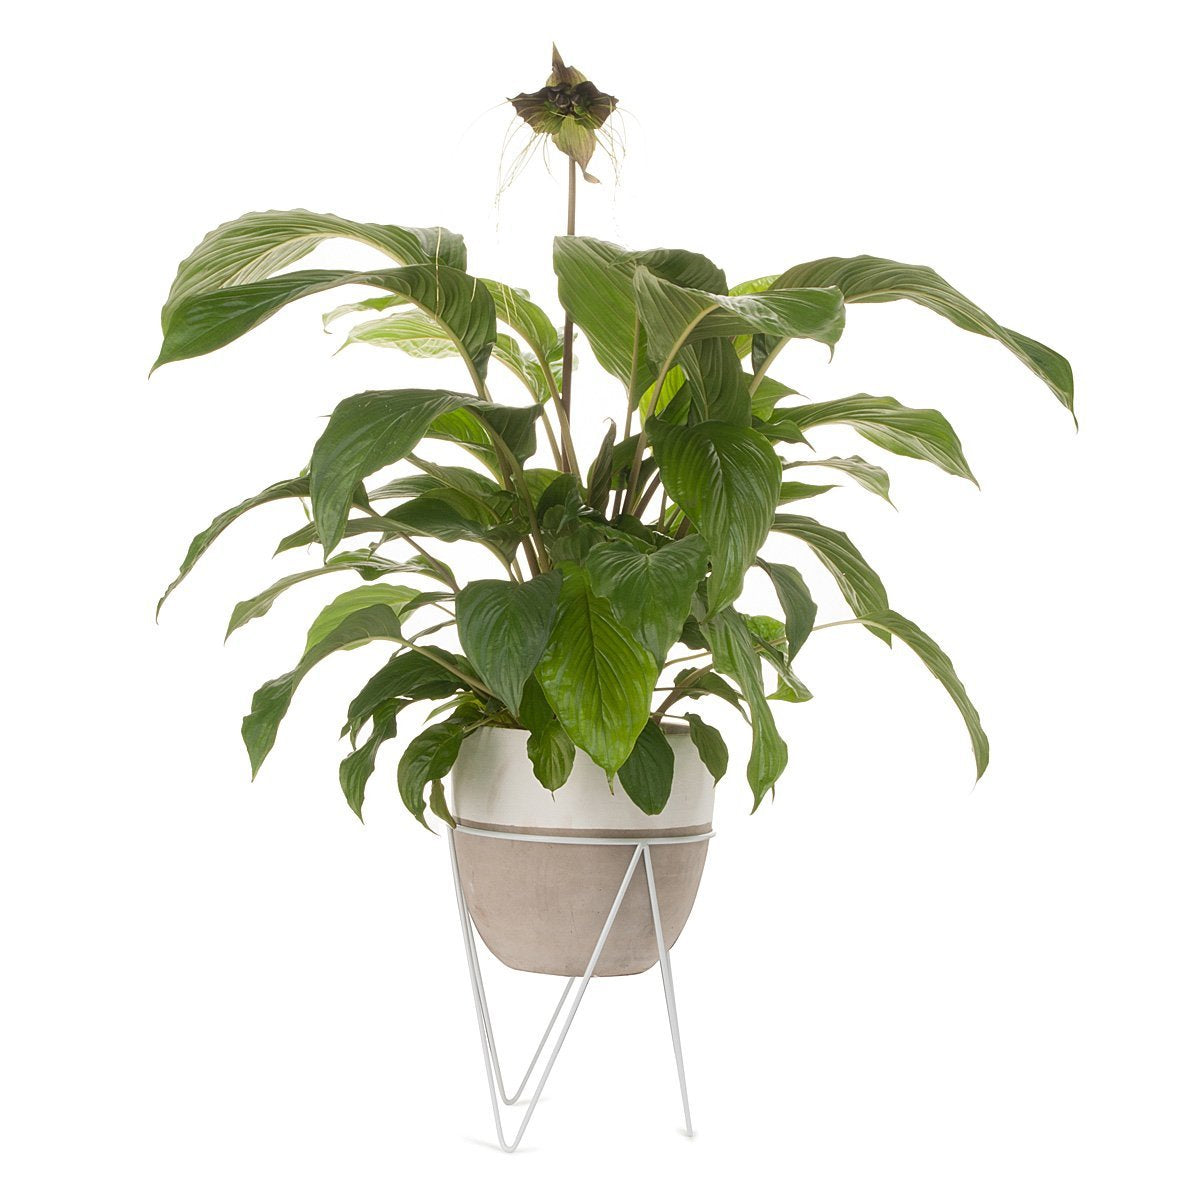 Bat Flower Concrete Planter With Stand